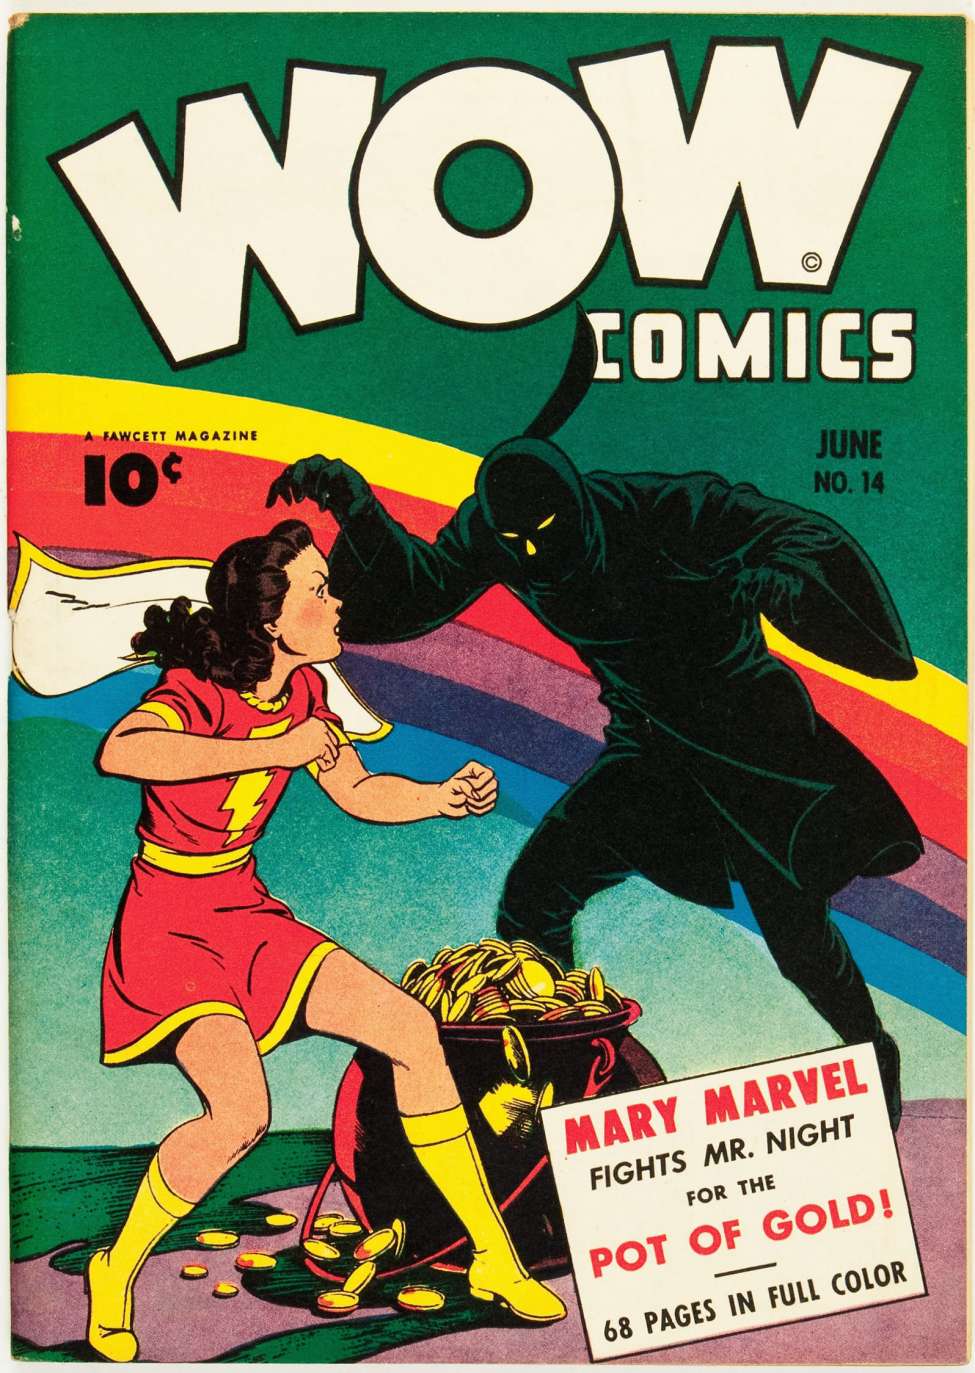 Comic Book Cover For Wow Comics 14 (alt) - Version 2